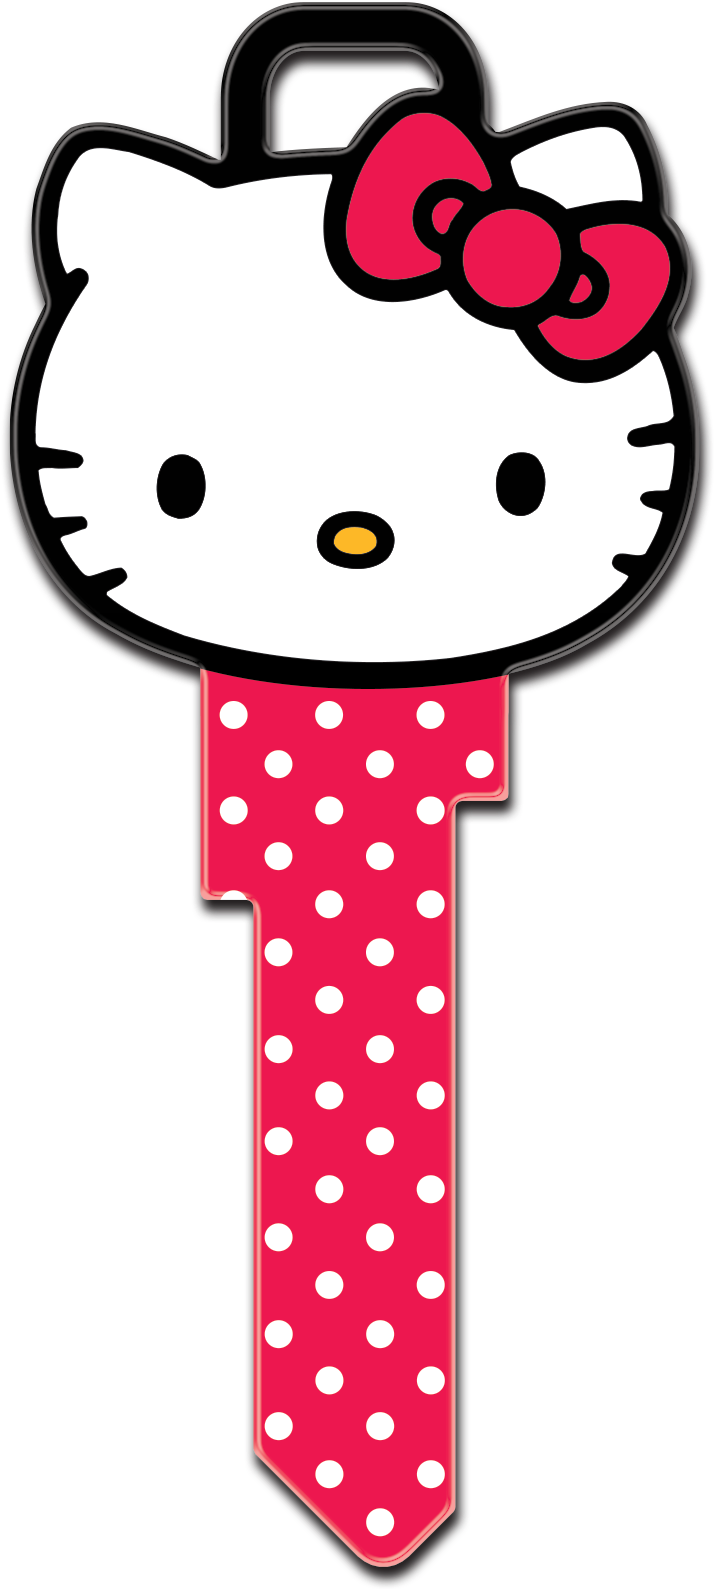 Free Shipping Buy 2 And Get 15% Off - Hello Kitty San Rio (863x1725)